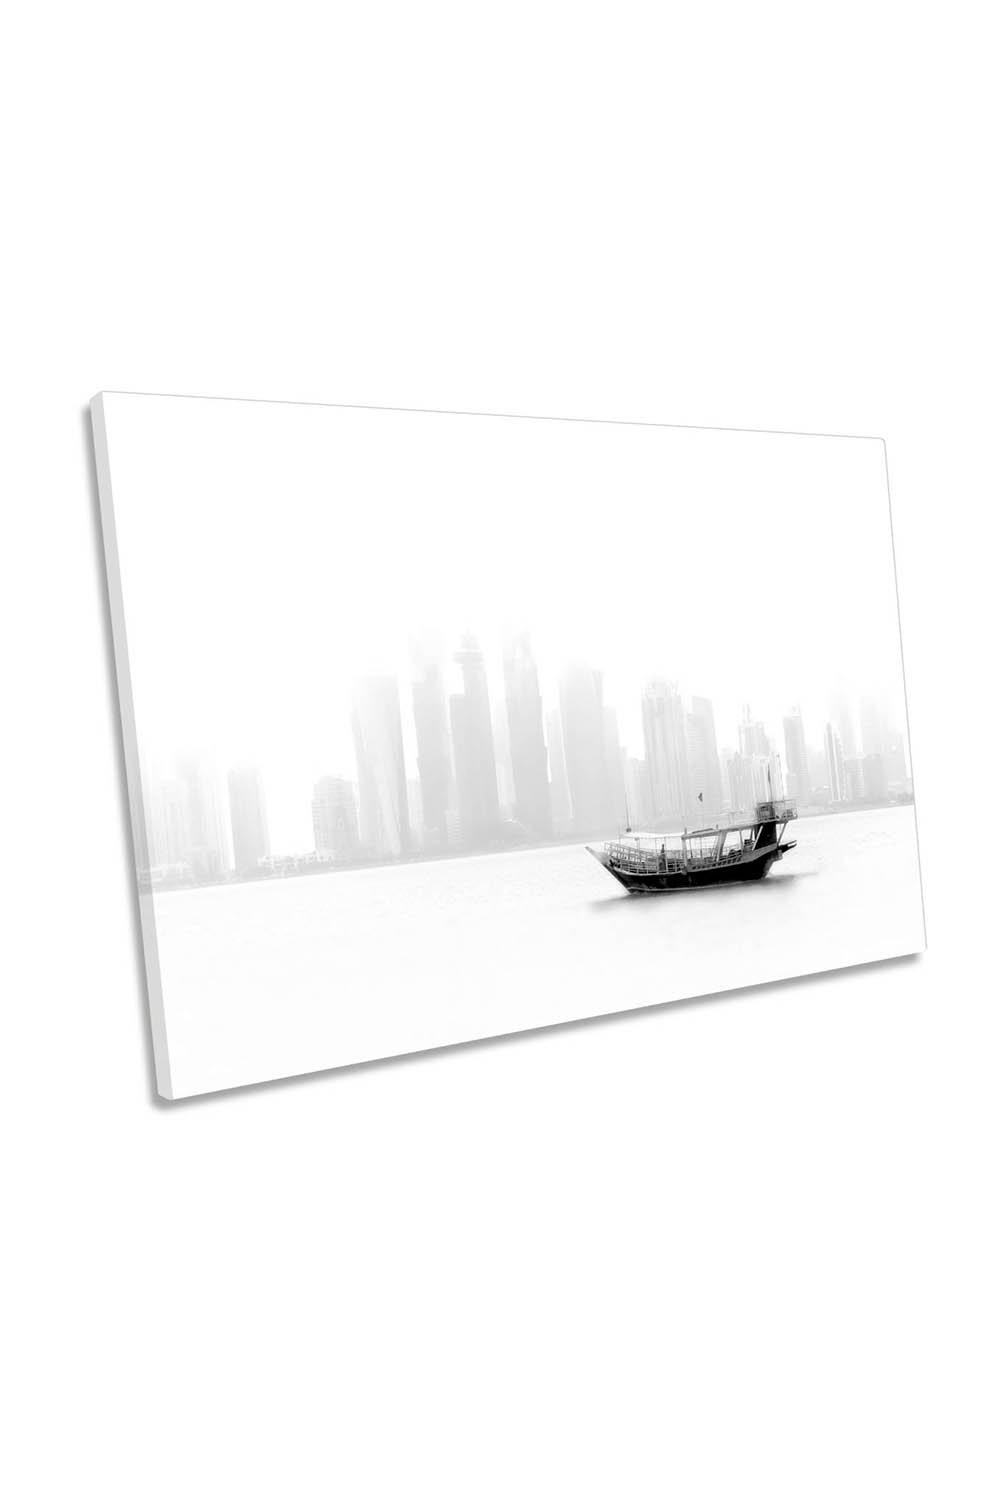 Lonely Boat Doha Qatar Skyline White Canvas Wall Art Picture Print